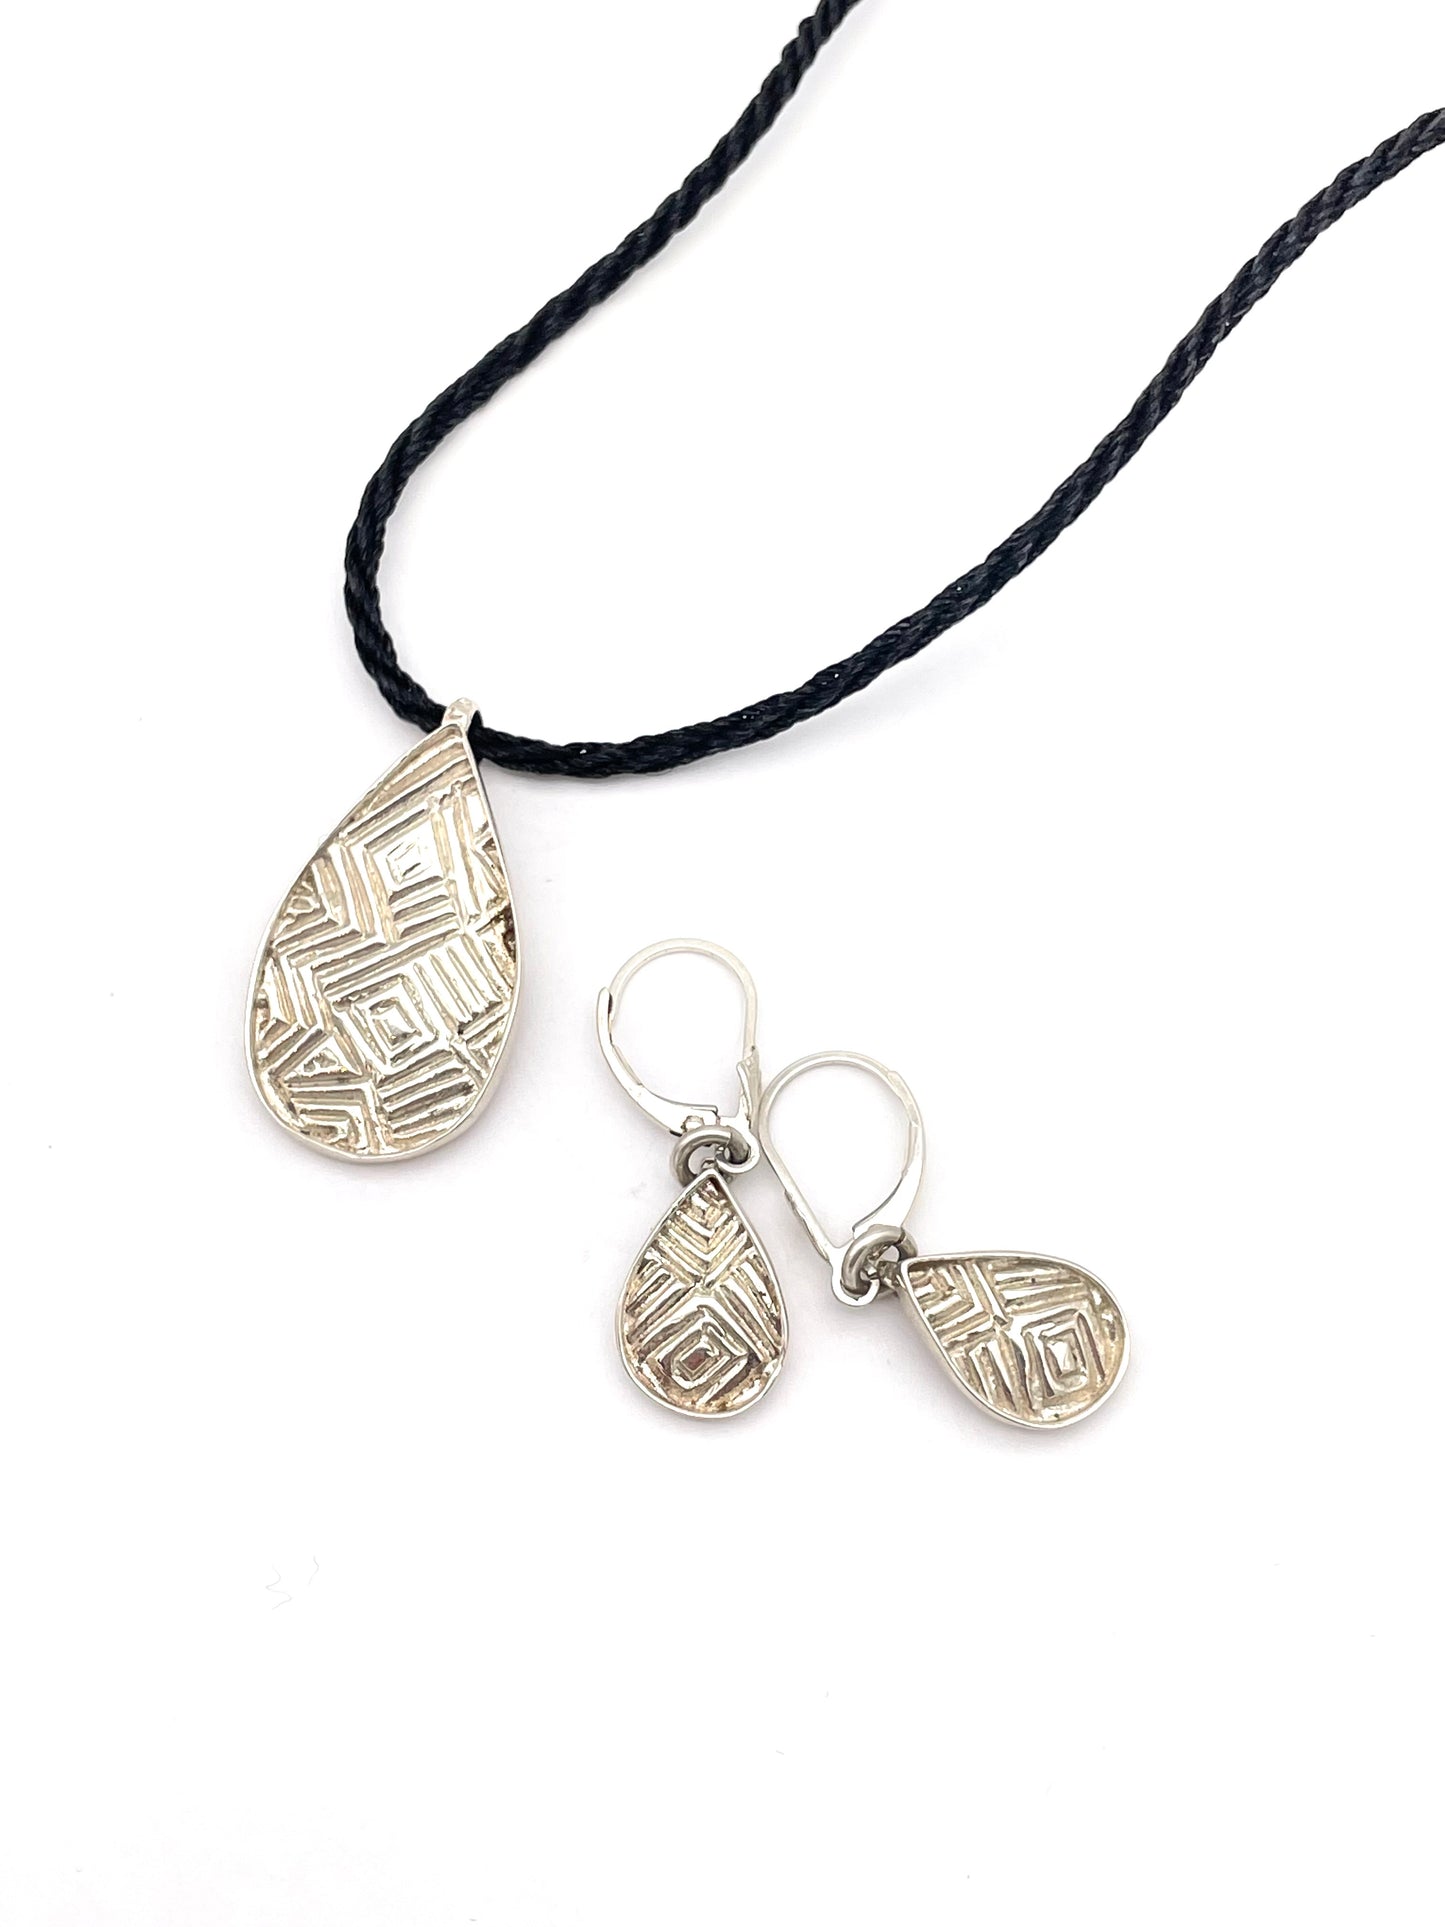 Matching Geometric-Patterned Earrings and Oval Pendant